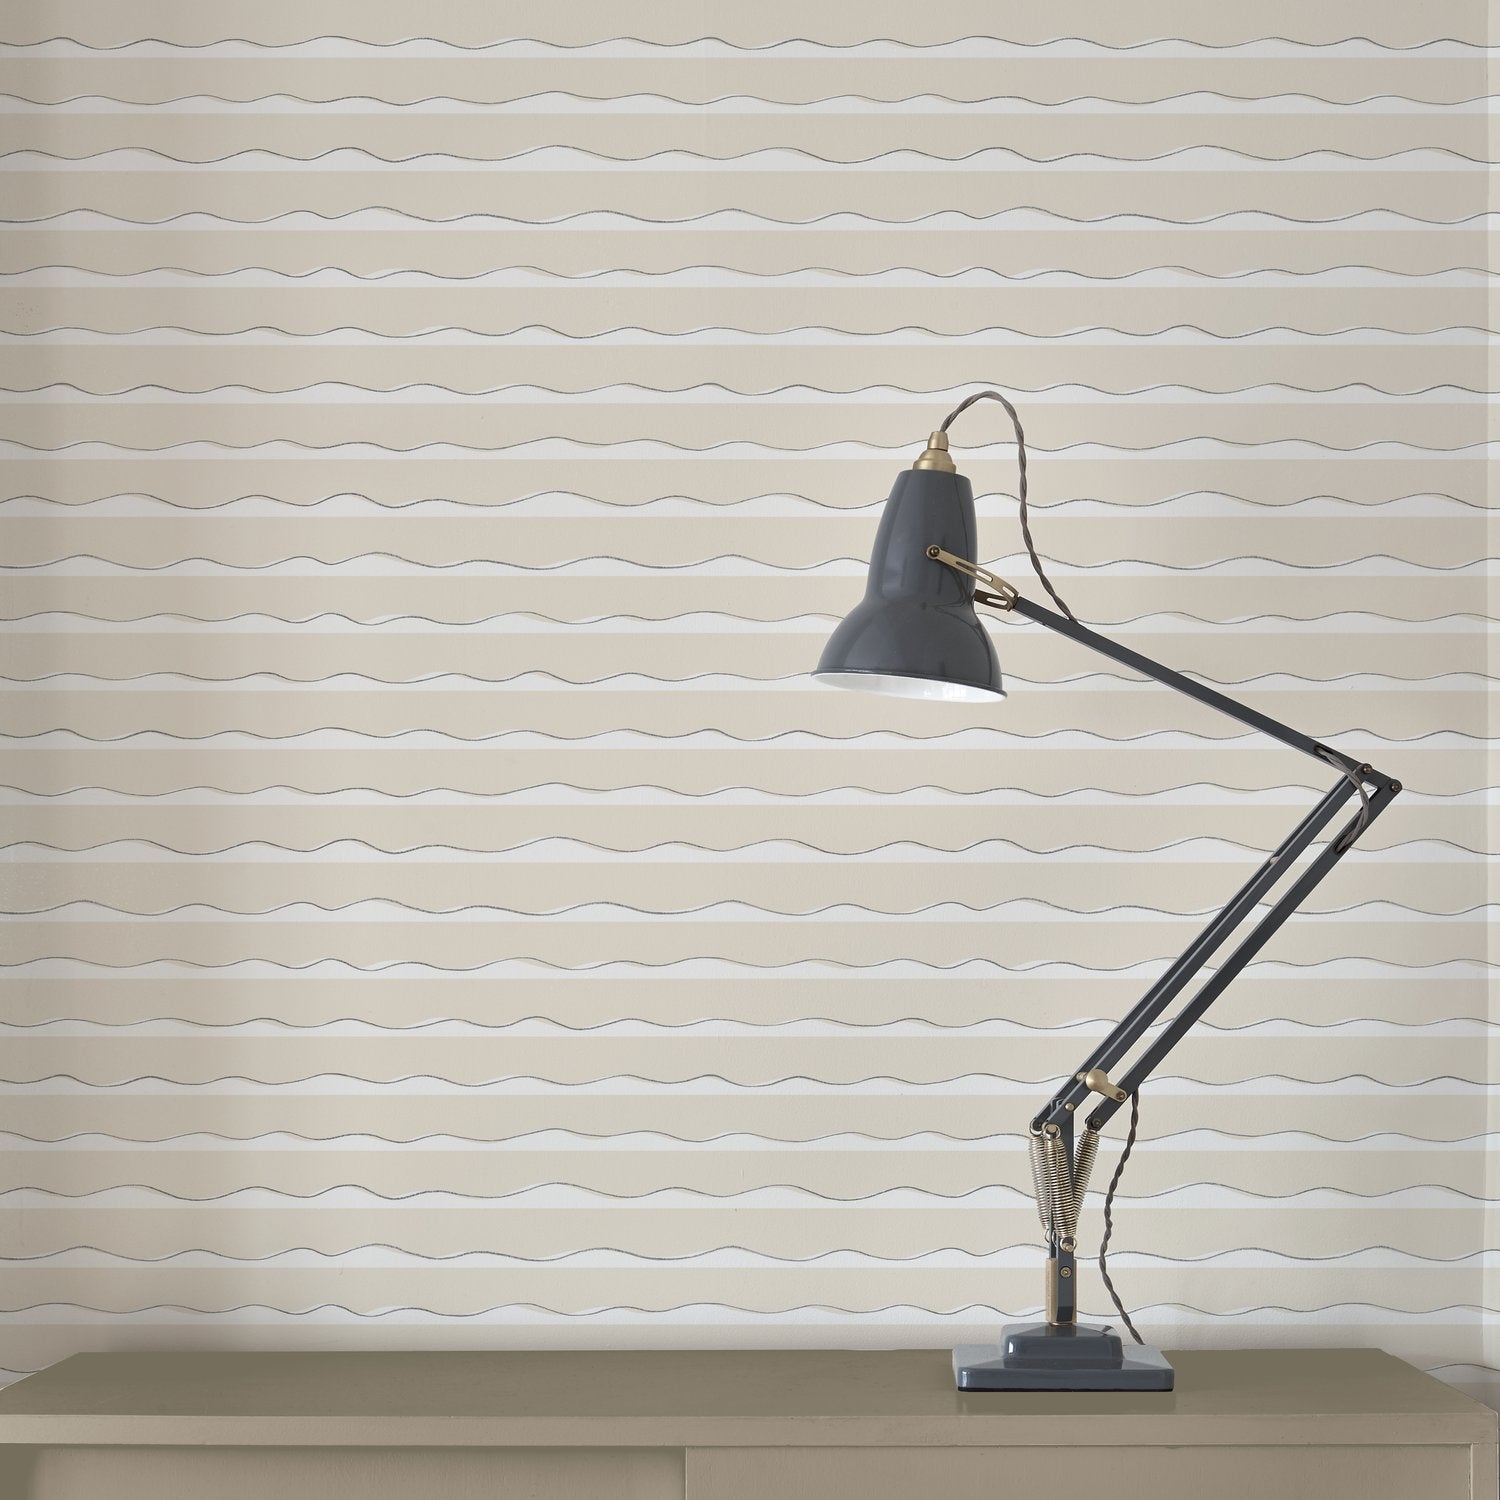 A lamp stands in front of a wall papered in an undulating stripe pattern in cream and tan with black accents.